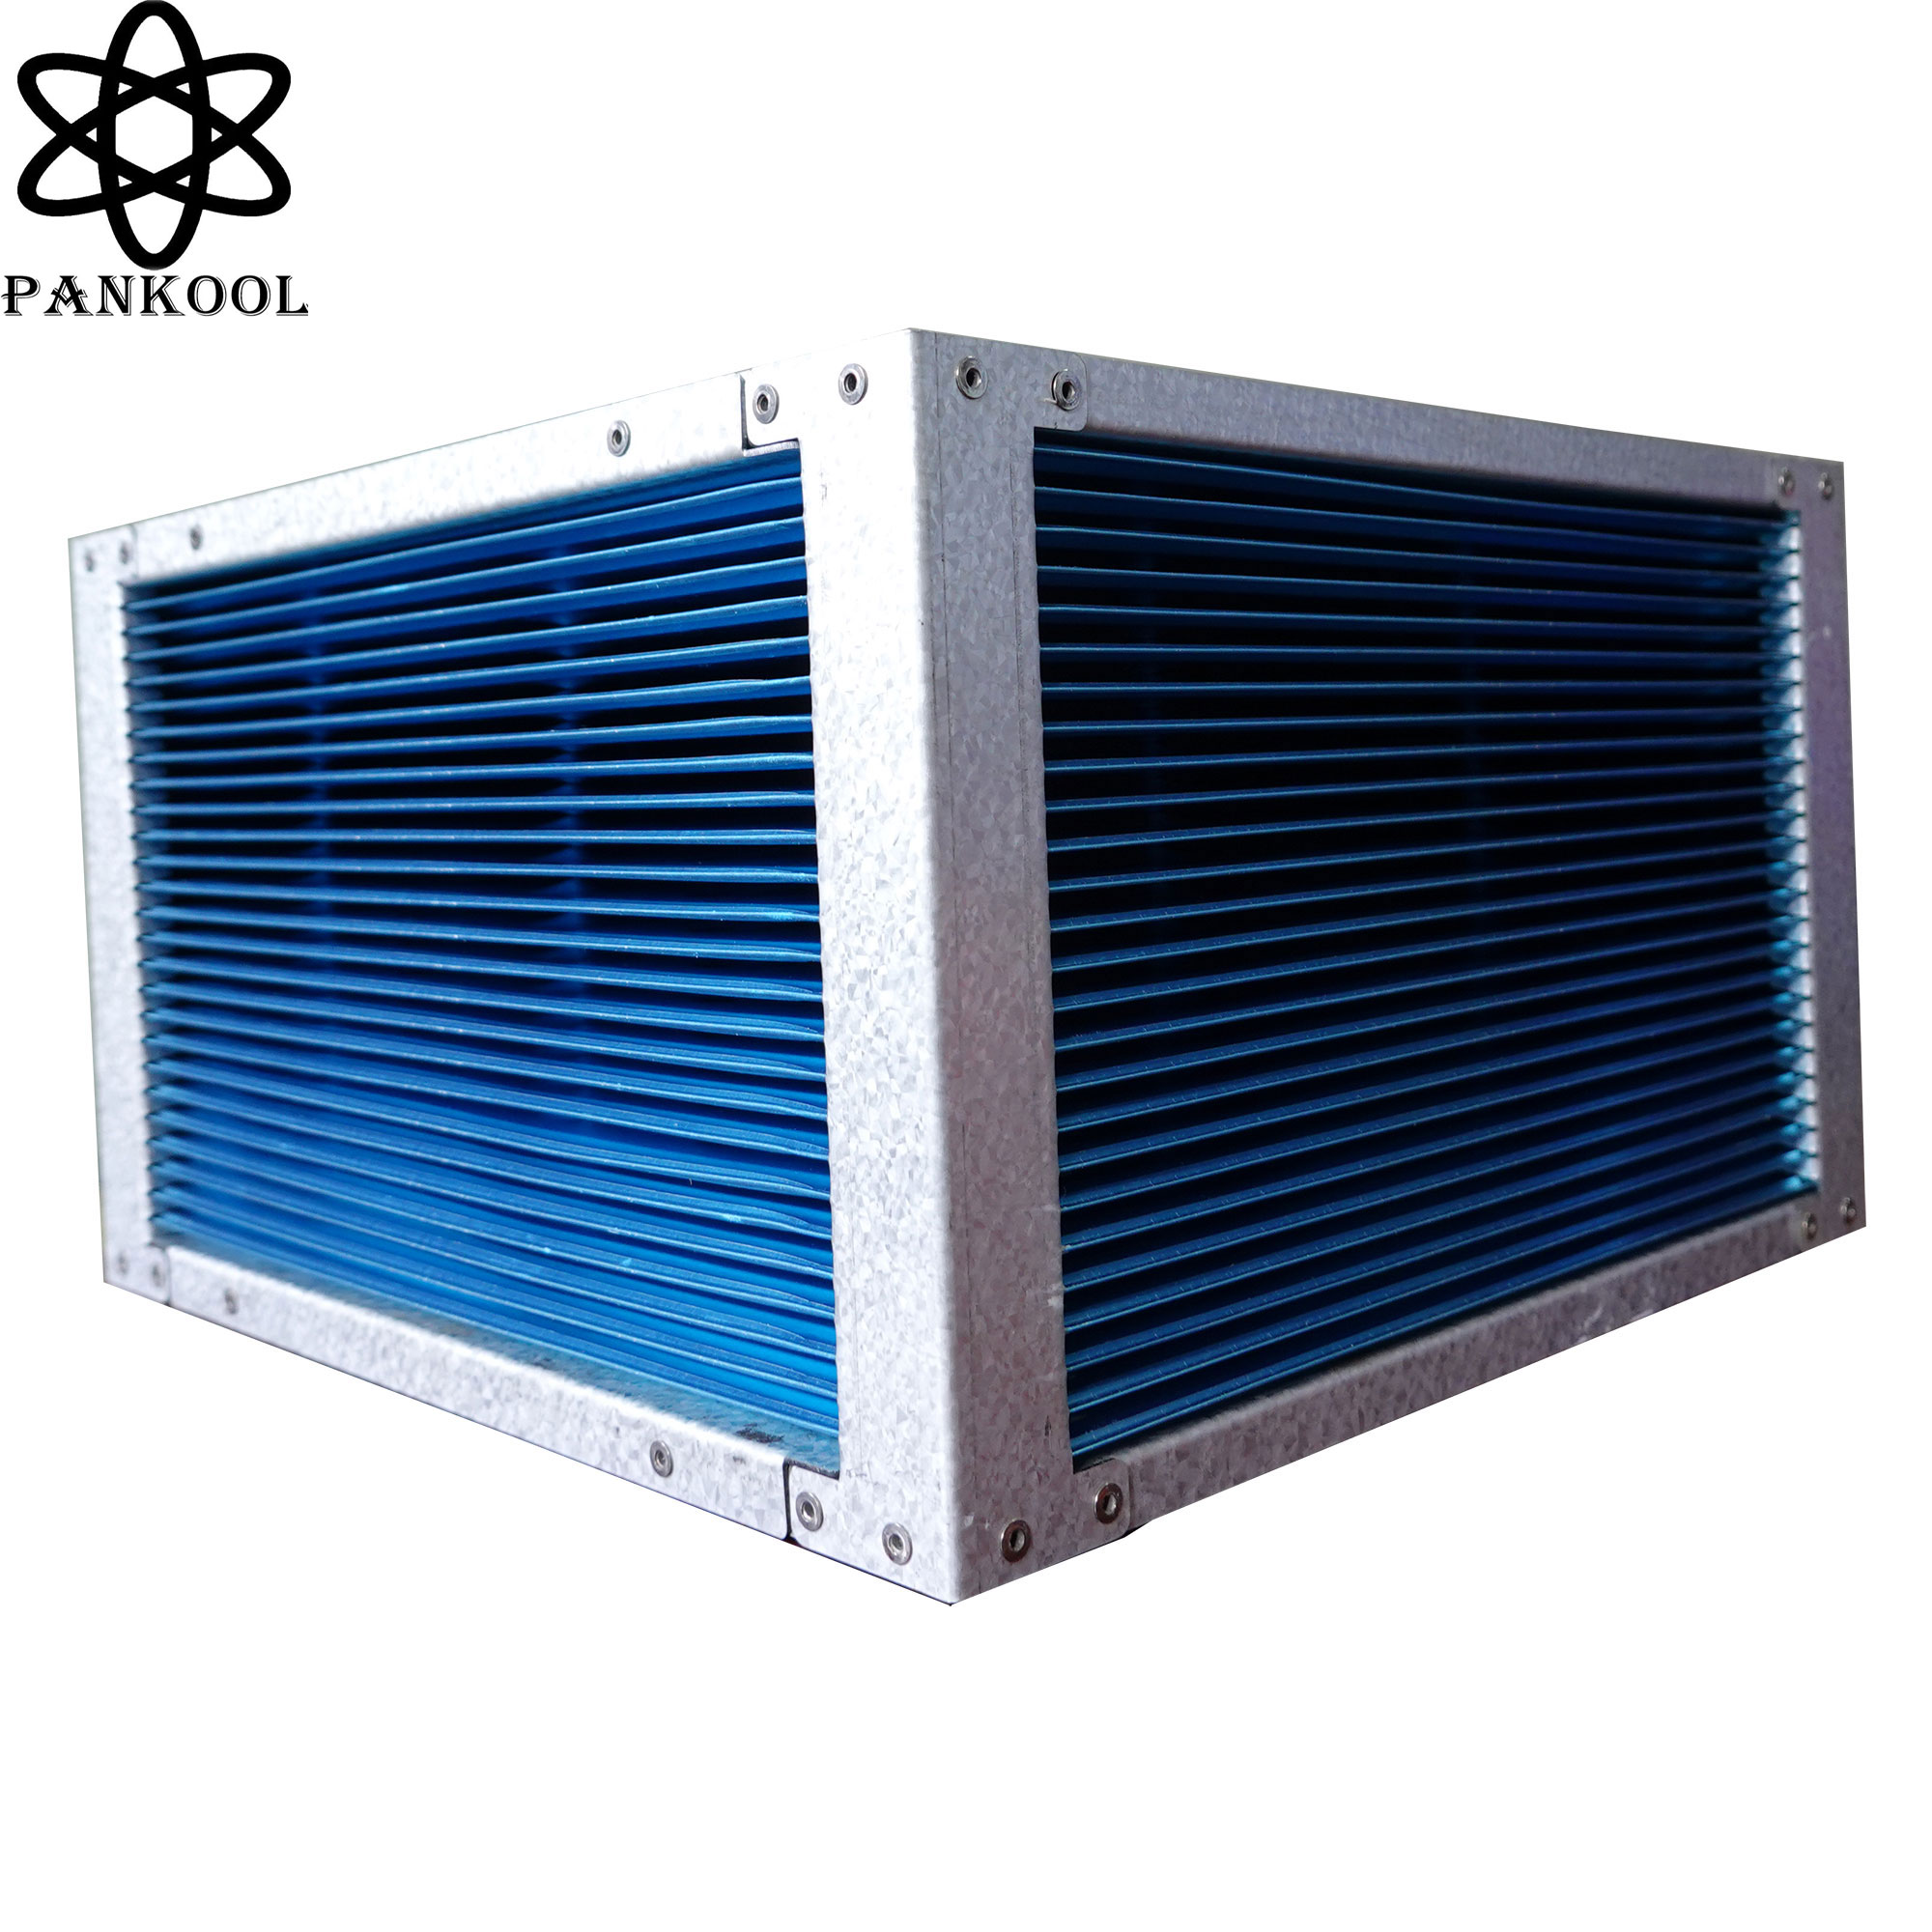 Top Quality Commercial Dehumidifiers - Wholesale and OEM Supplier in China